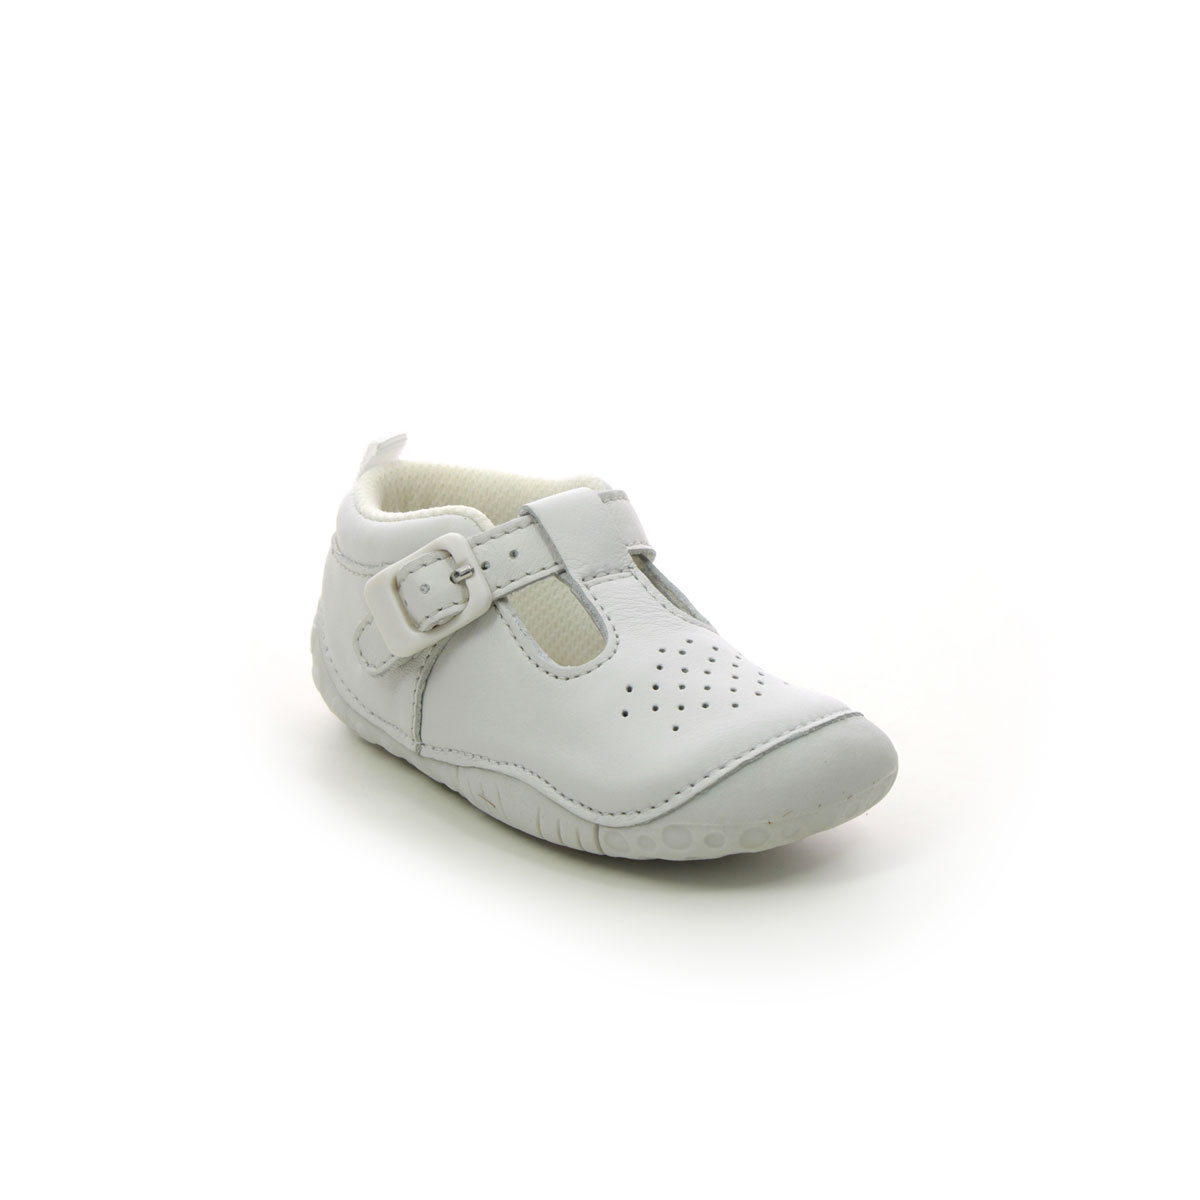 Start Rite - Baby Jack In White Leather 0746-76F In Size 4.5 In Plain White Leather Boys First And Toddler Shoes  In White Leather For kids